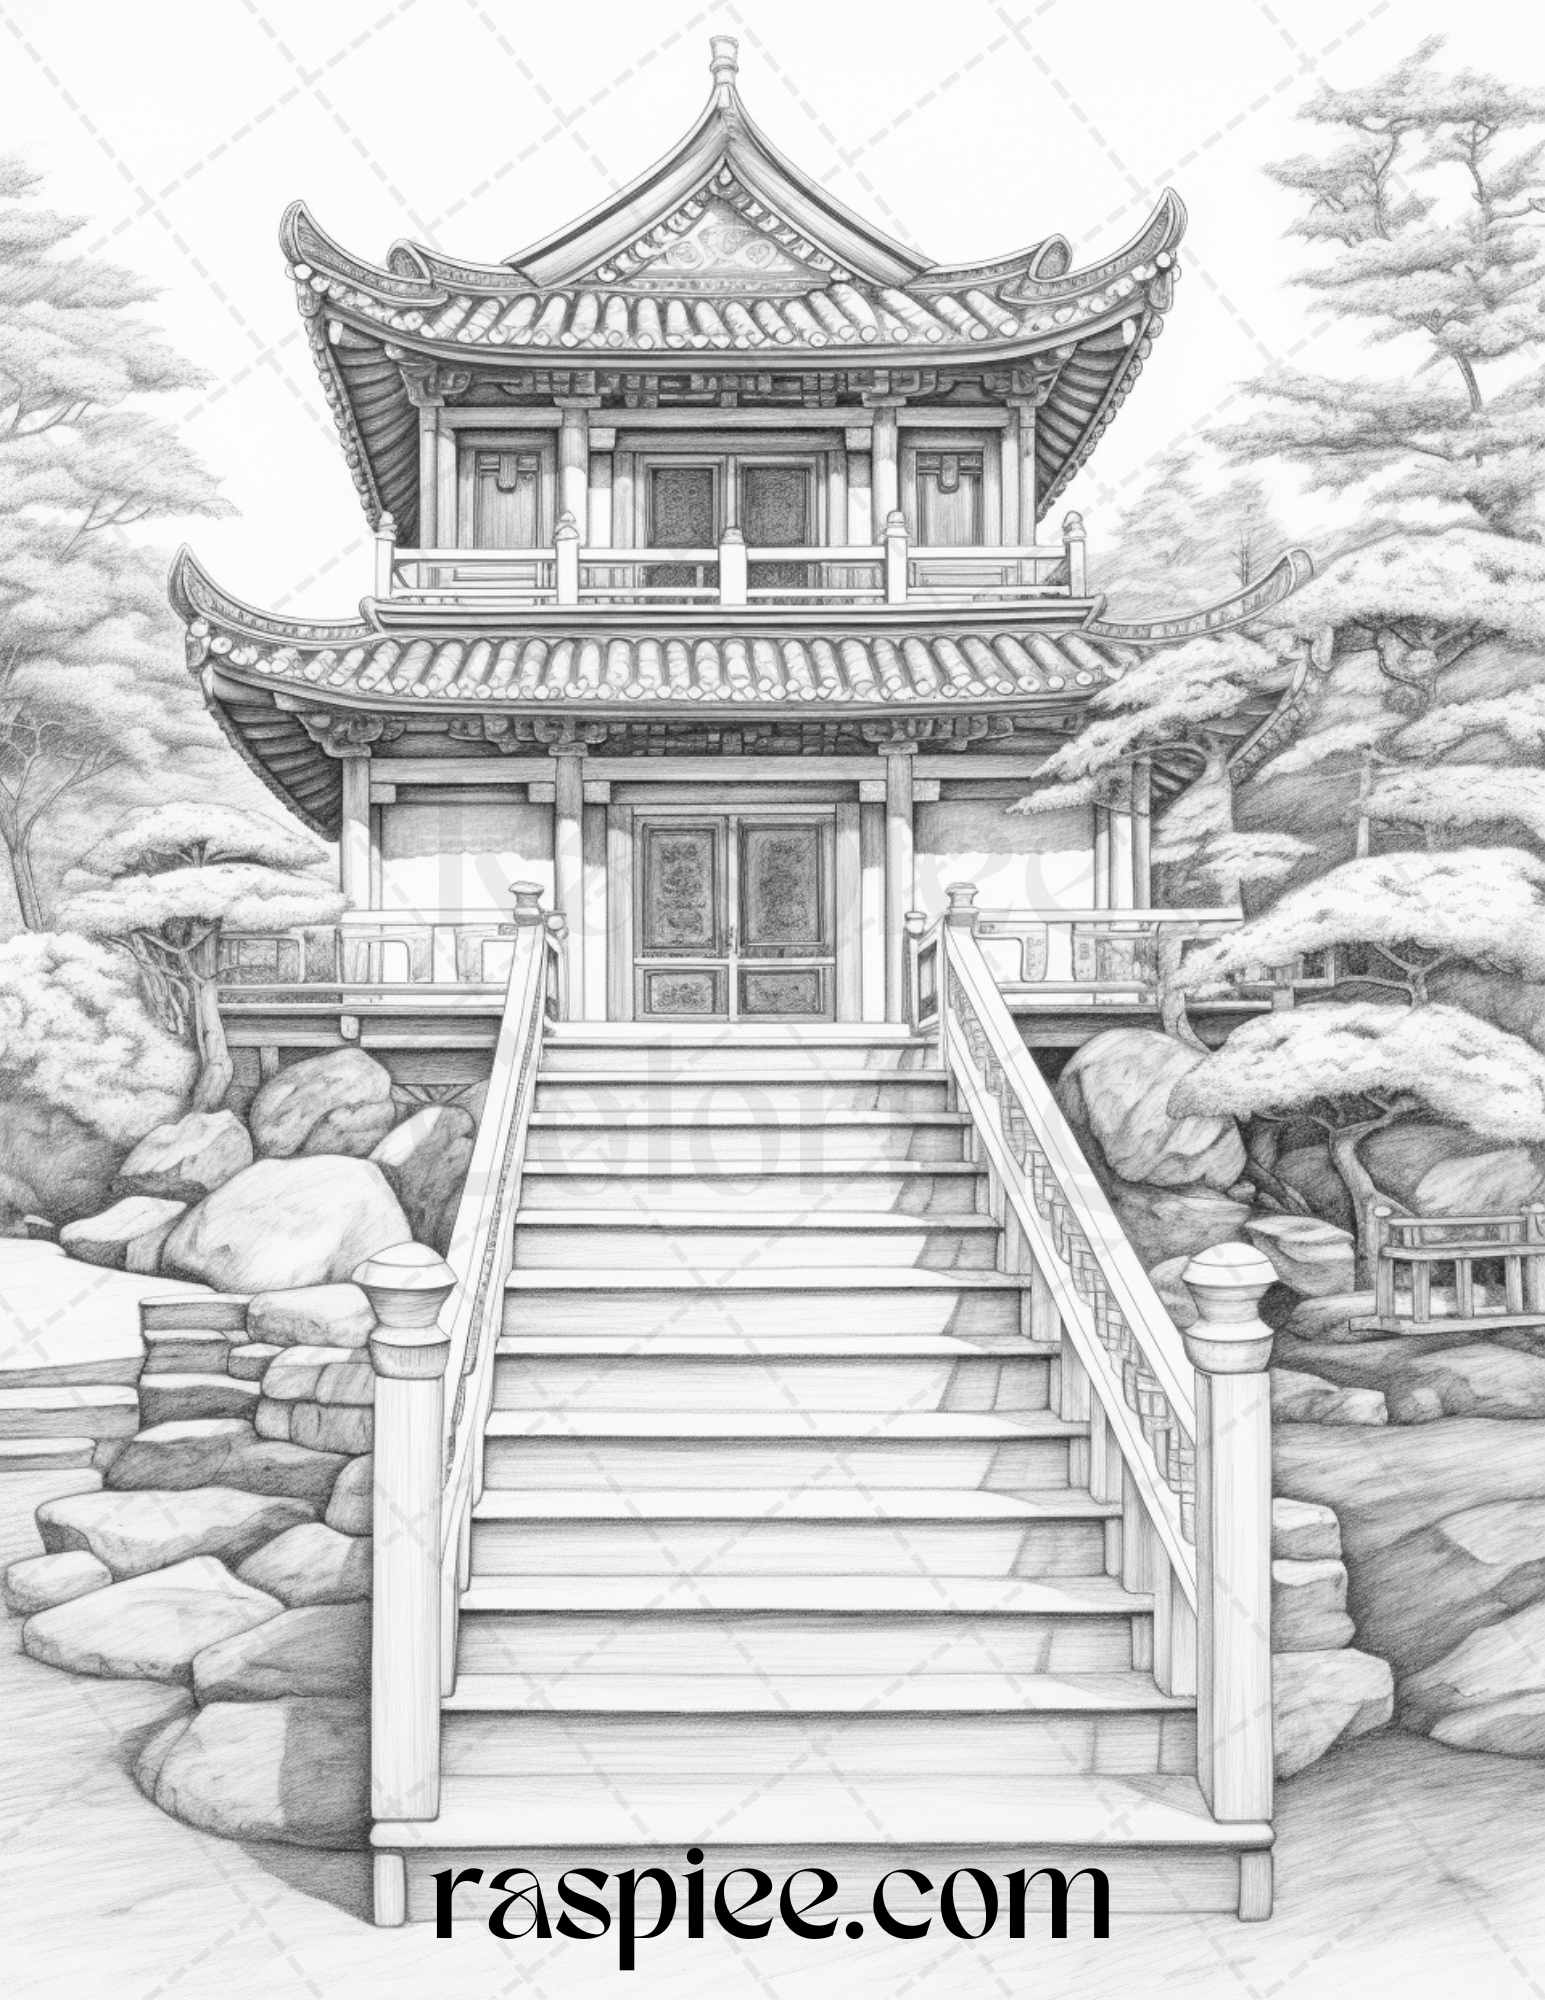 40 Traditional Chinese Houses Grayscale Coloring Pages Printable for Adults, PDF File Instant Download - Raspiee Coloring